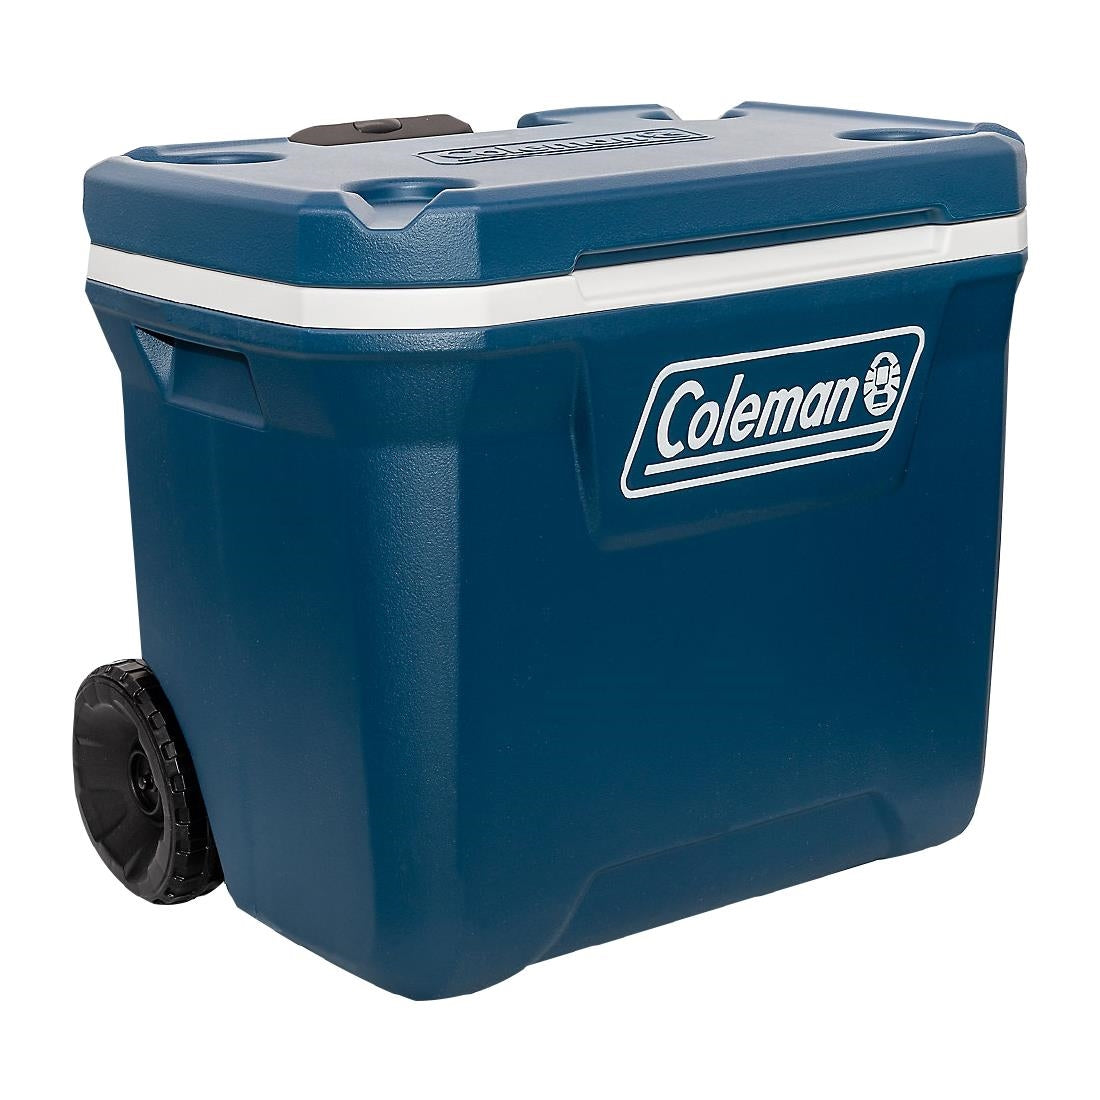 CX041 Coleman Xtreme Wheeled Cooler Blue 47Ltr JD Catering Equipment Solutions Ltd